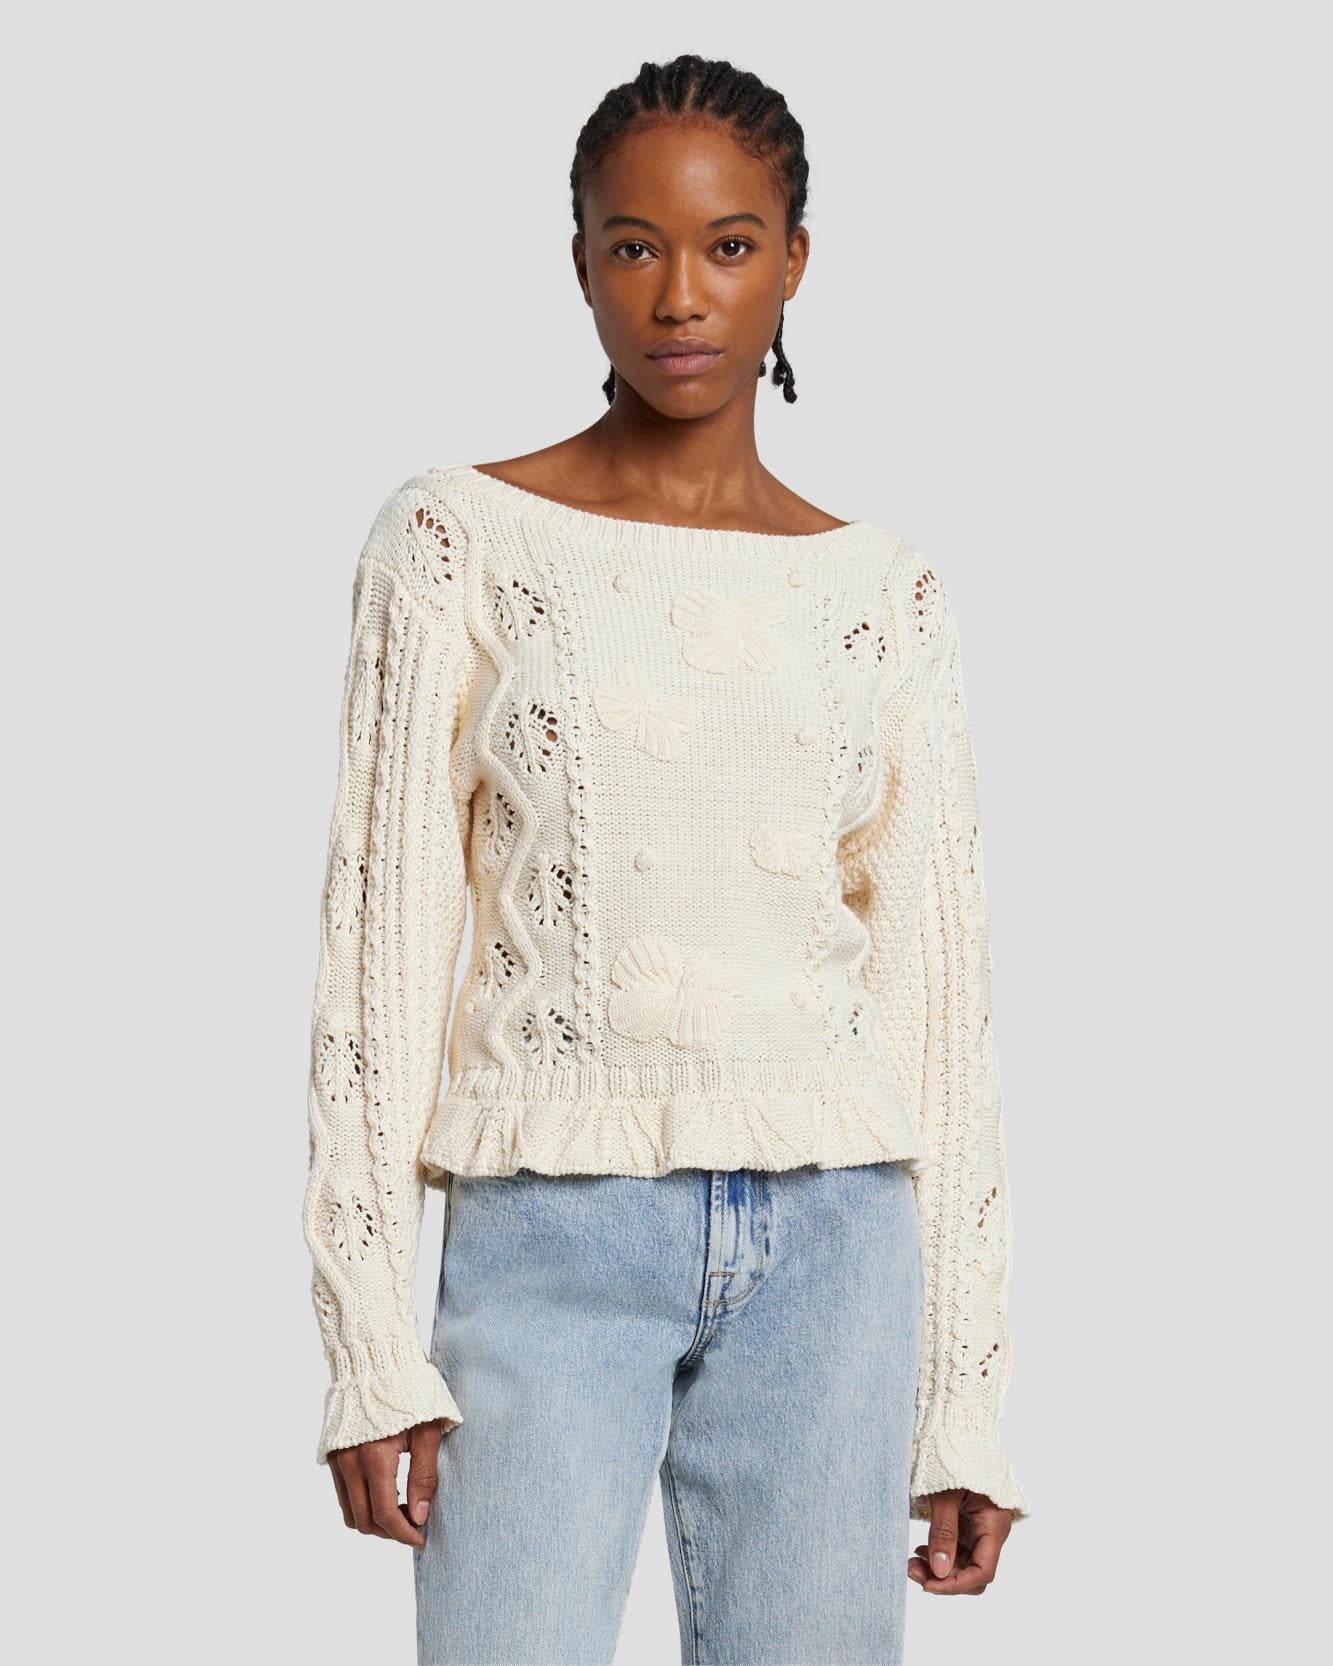 Floral Cable Knit Sweater in Cream | 7 For All Mankind